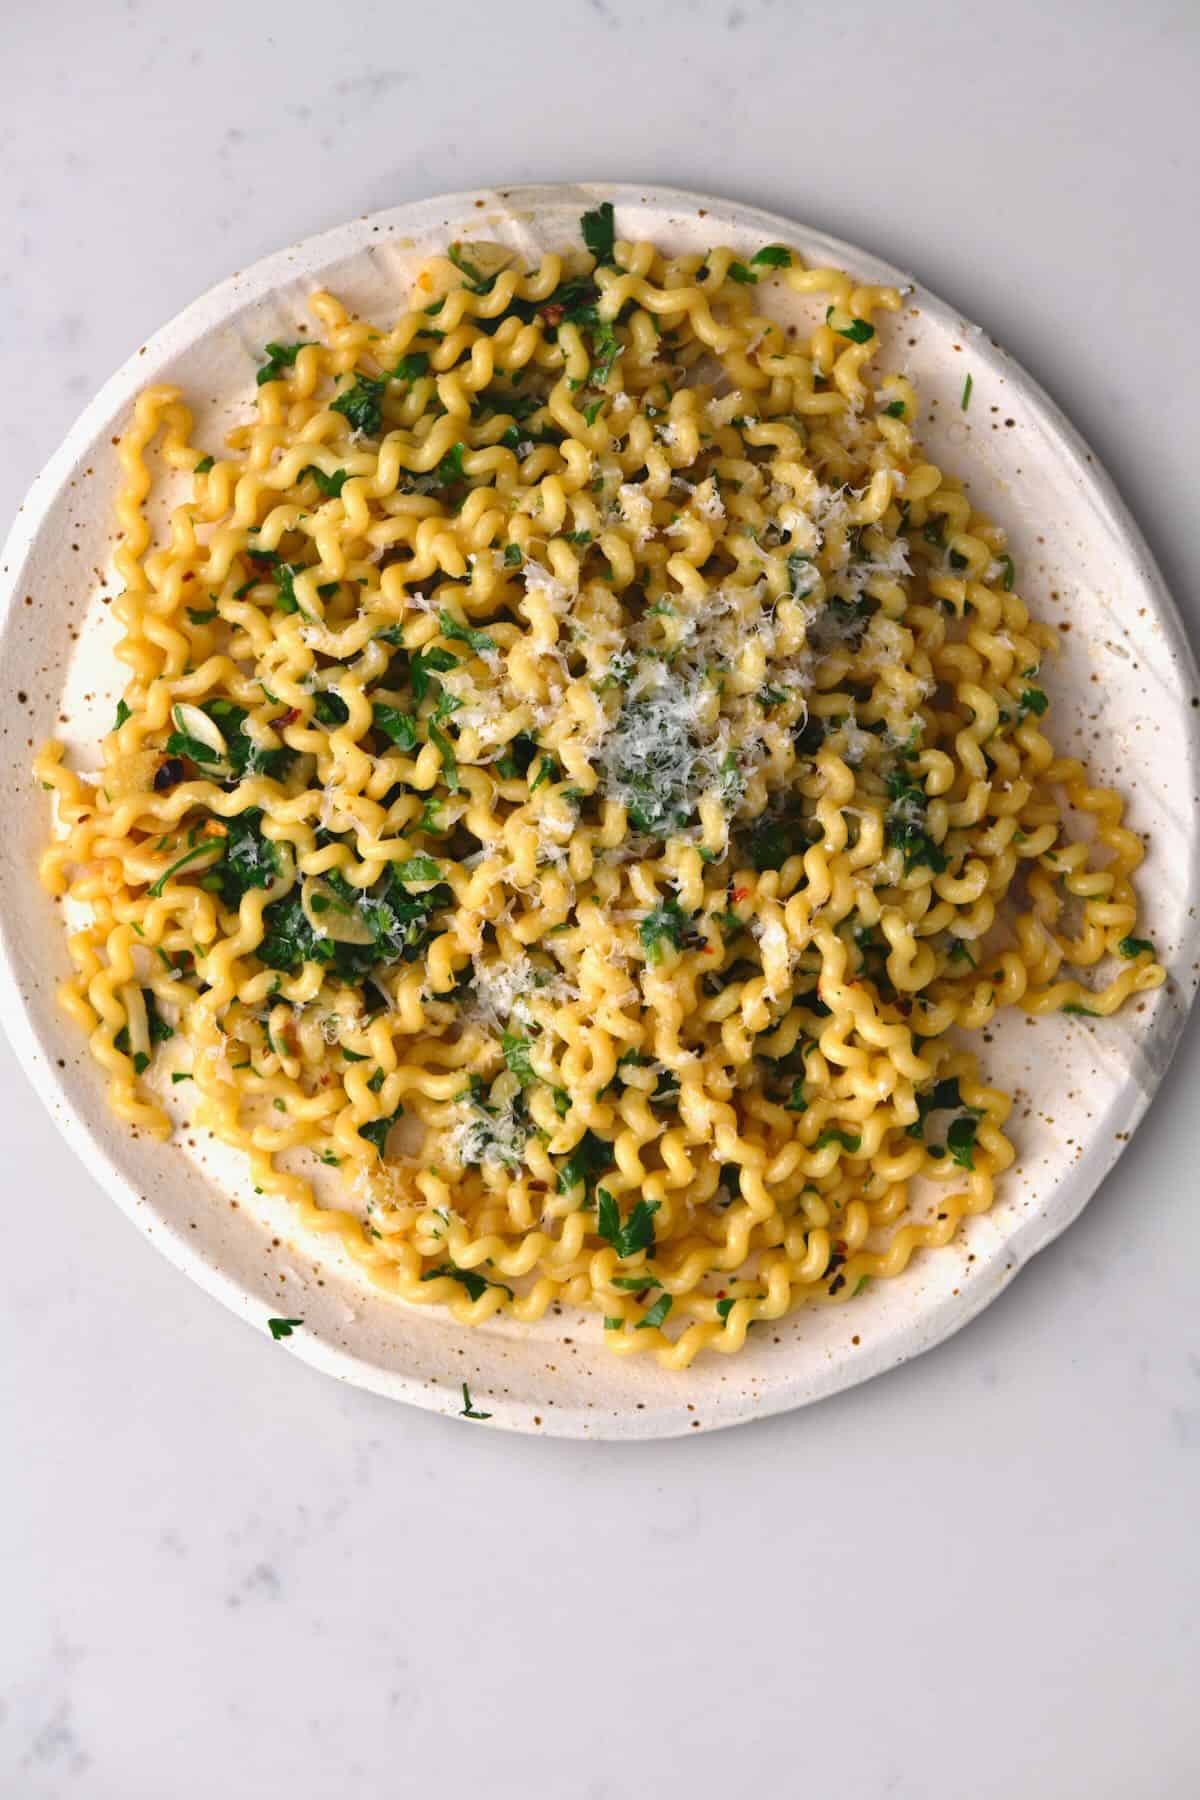 Garlic olive oil pasta topped with parmesan